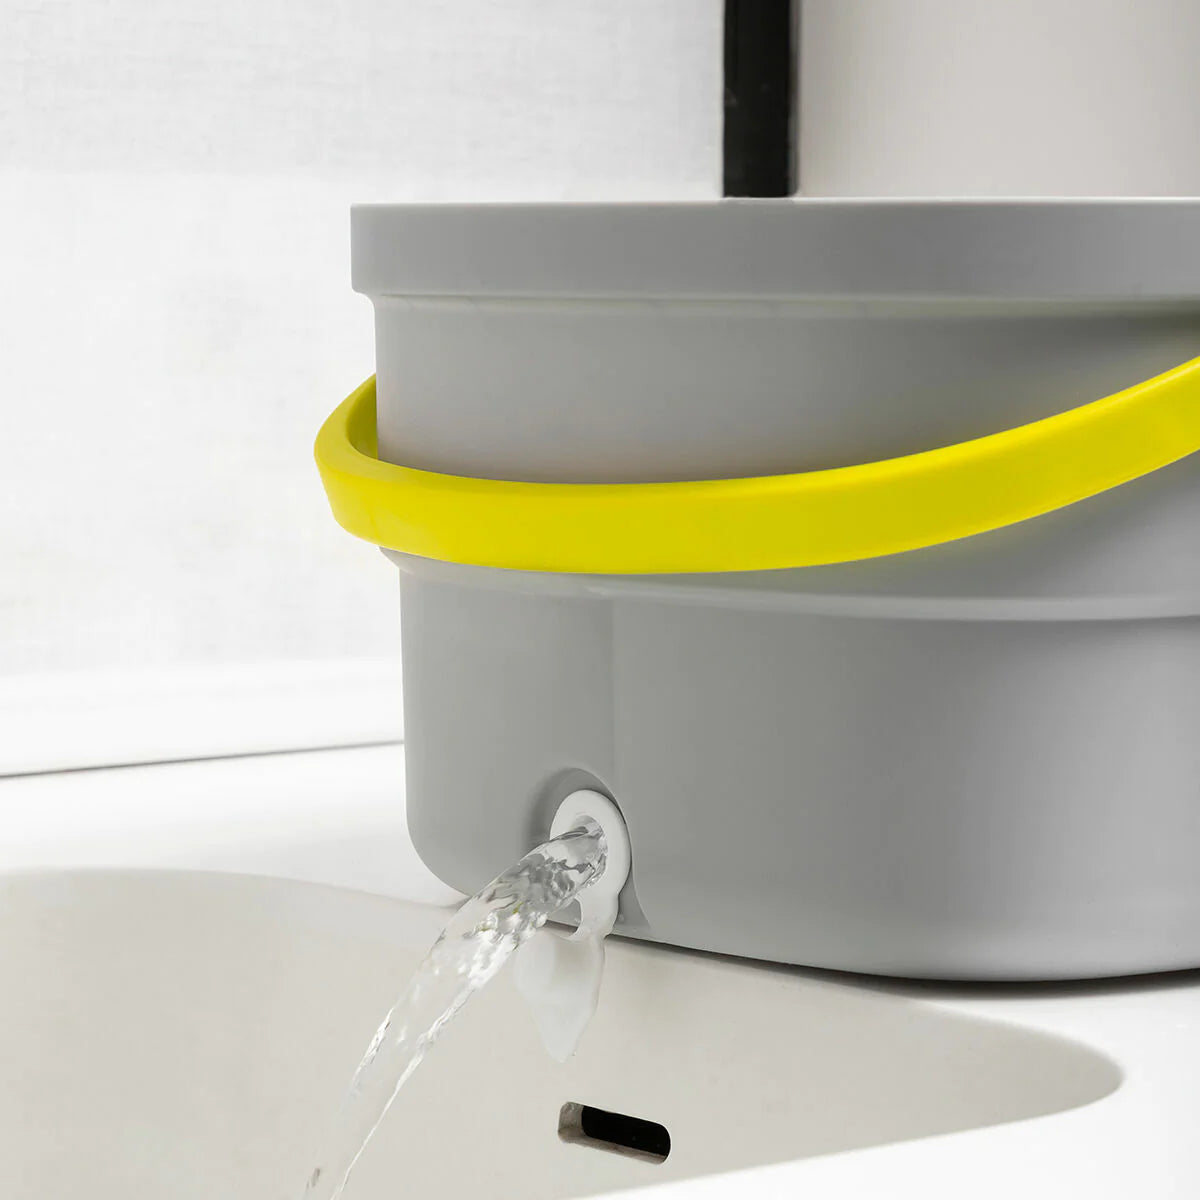 Self-Cleaning Spin Mop with Separation Bucket